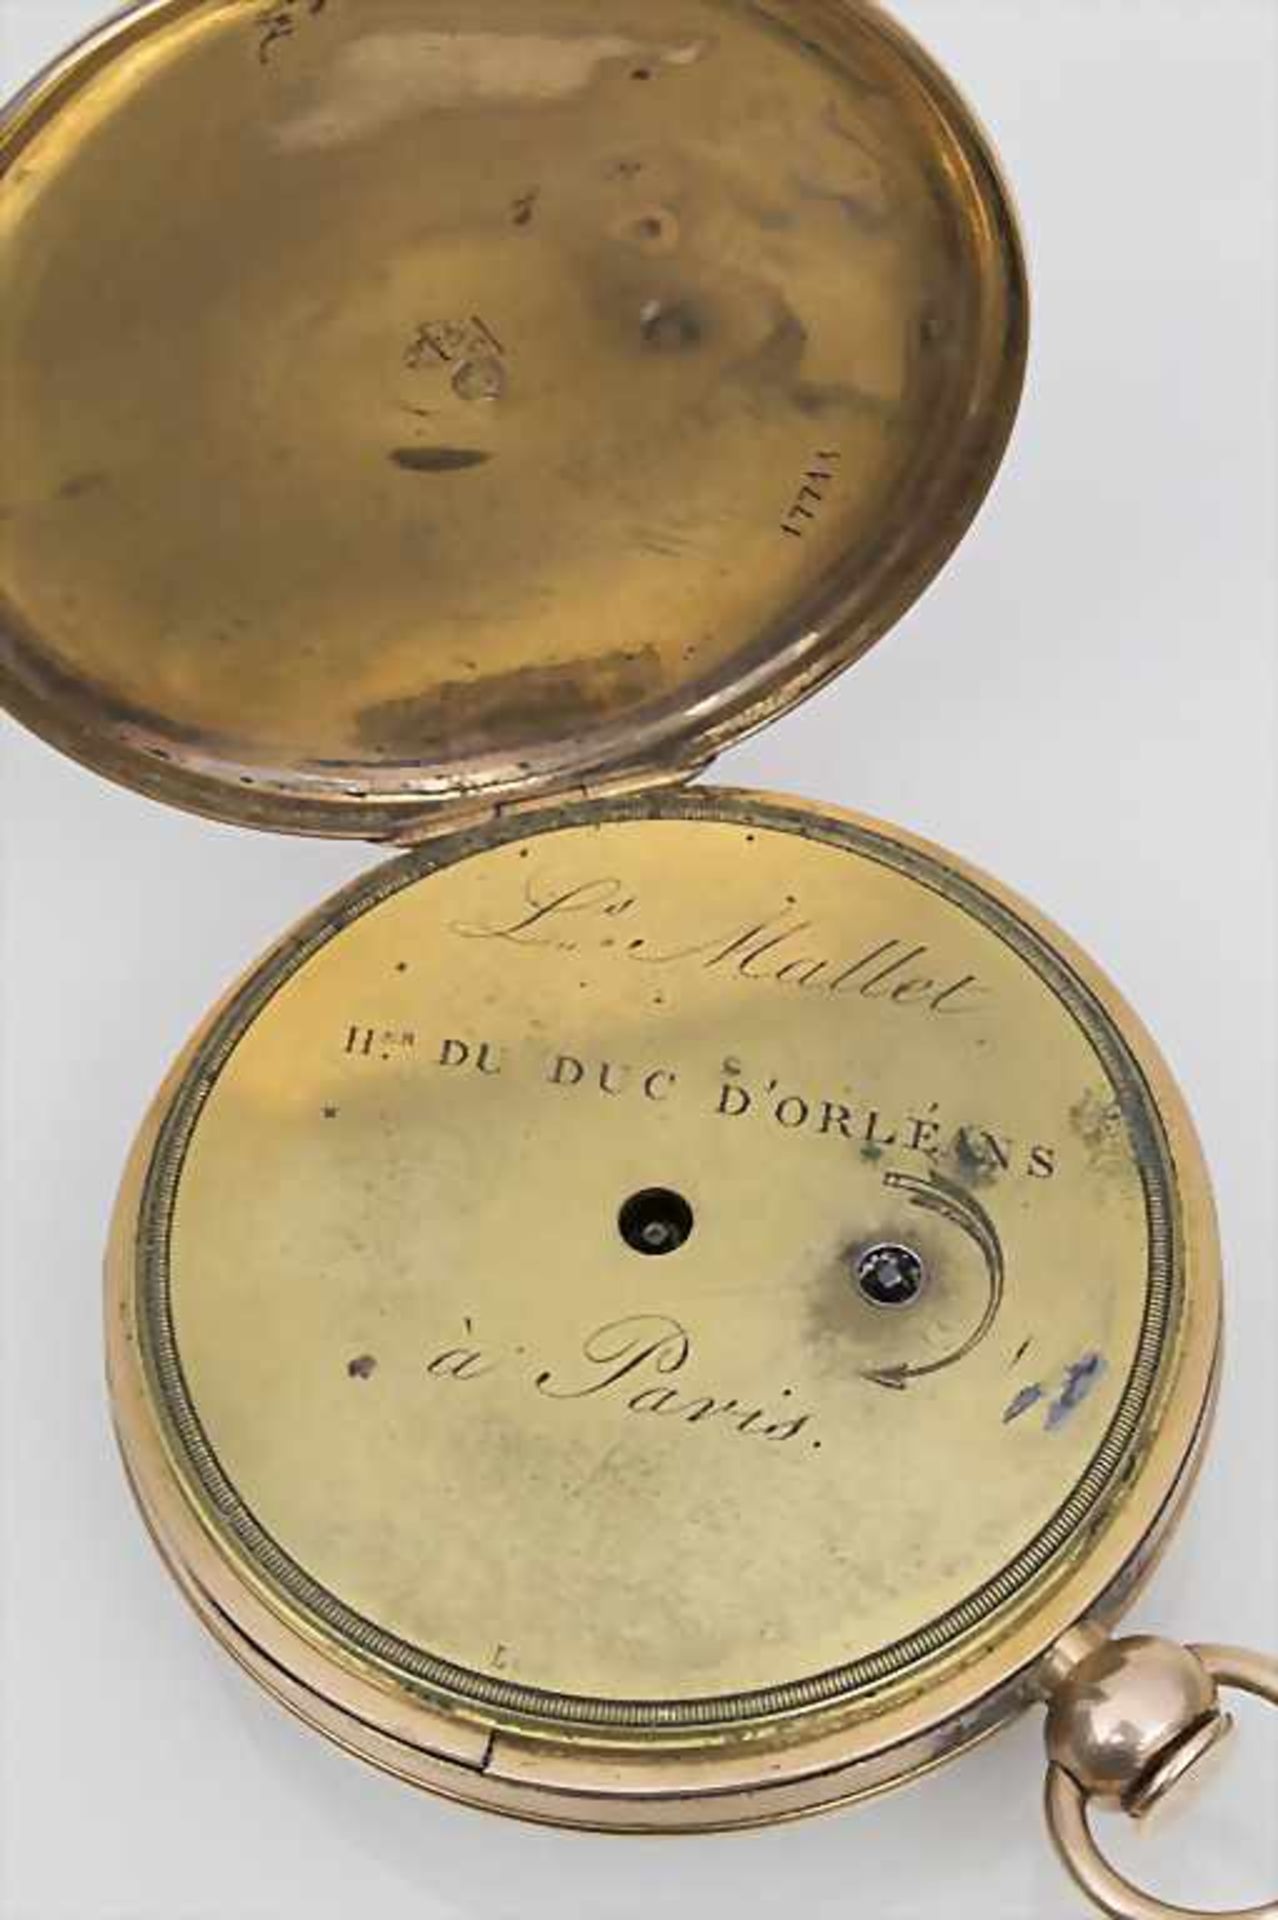 Offene Taschenuhr mit 1/4 Repetition / A pocket watch 1/4 quarter repeater, Louis Mallet, Paris, - Image 2 of 4